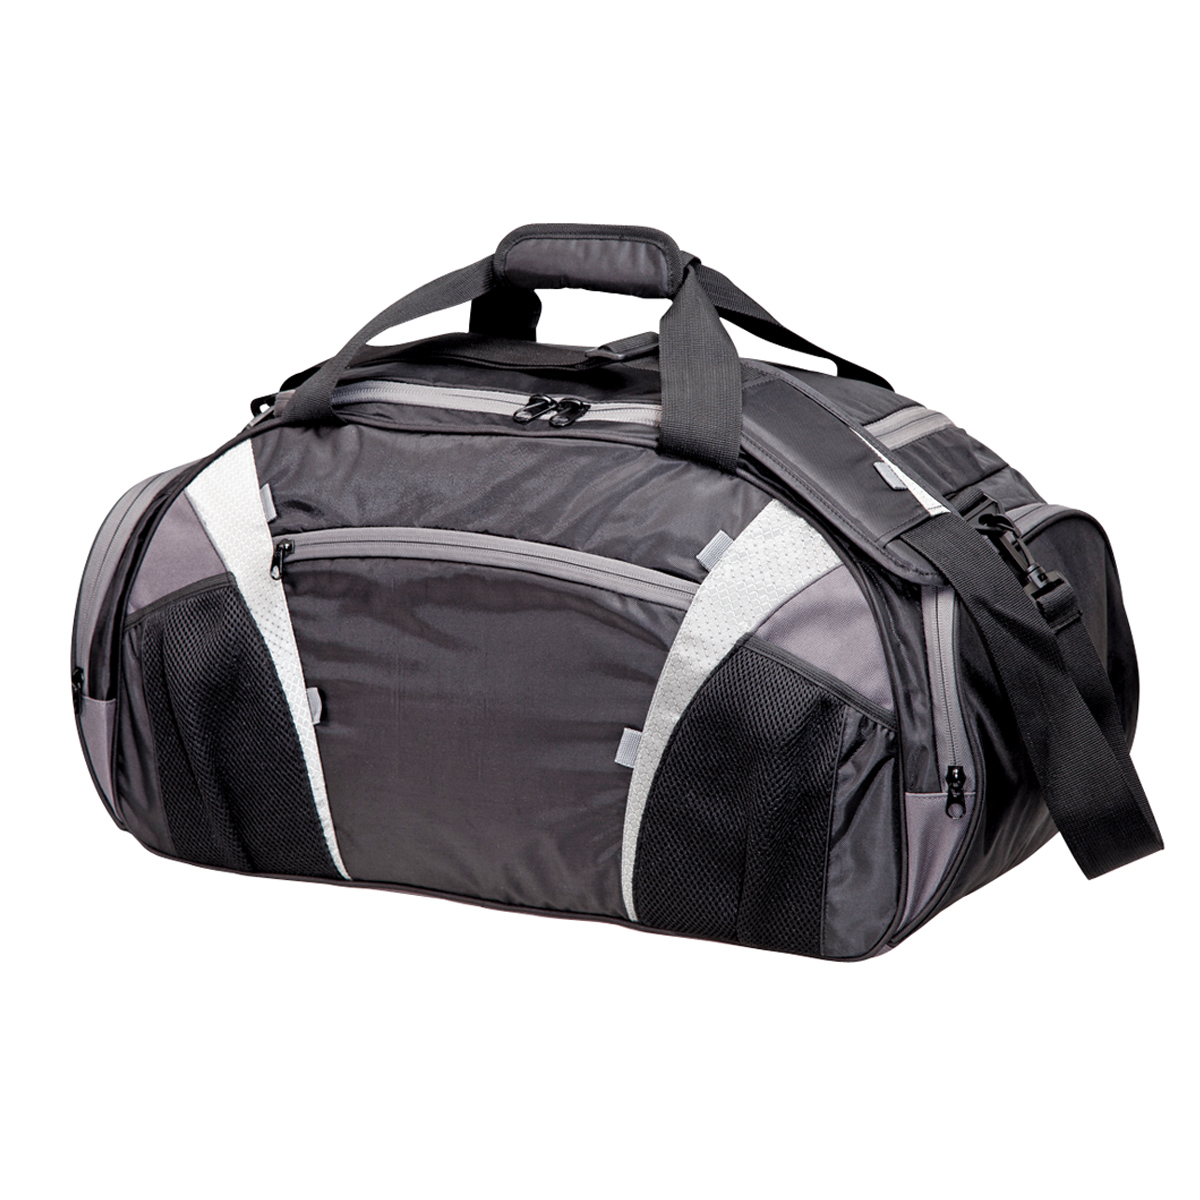 Chicane Sports Bag - Image Group